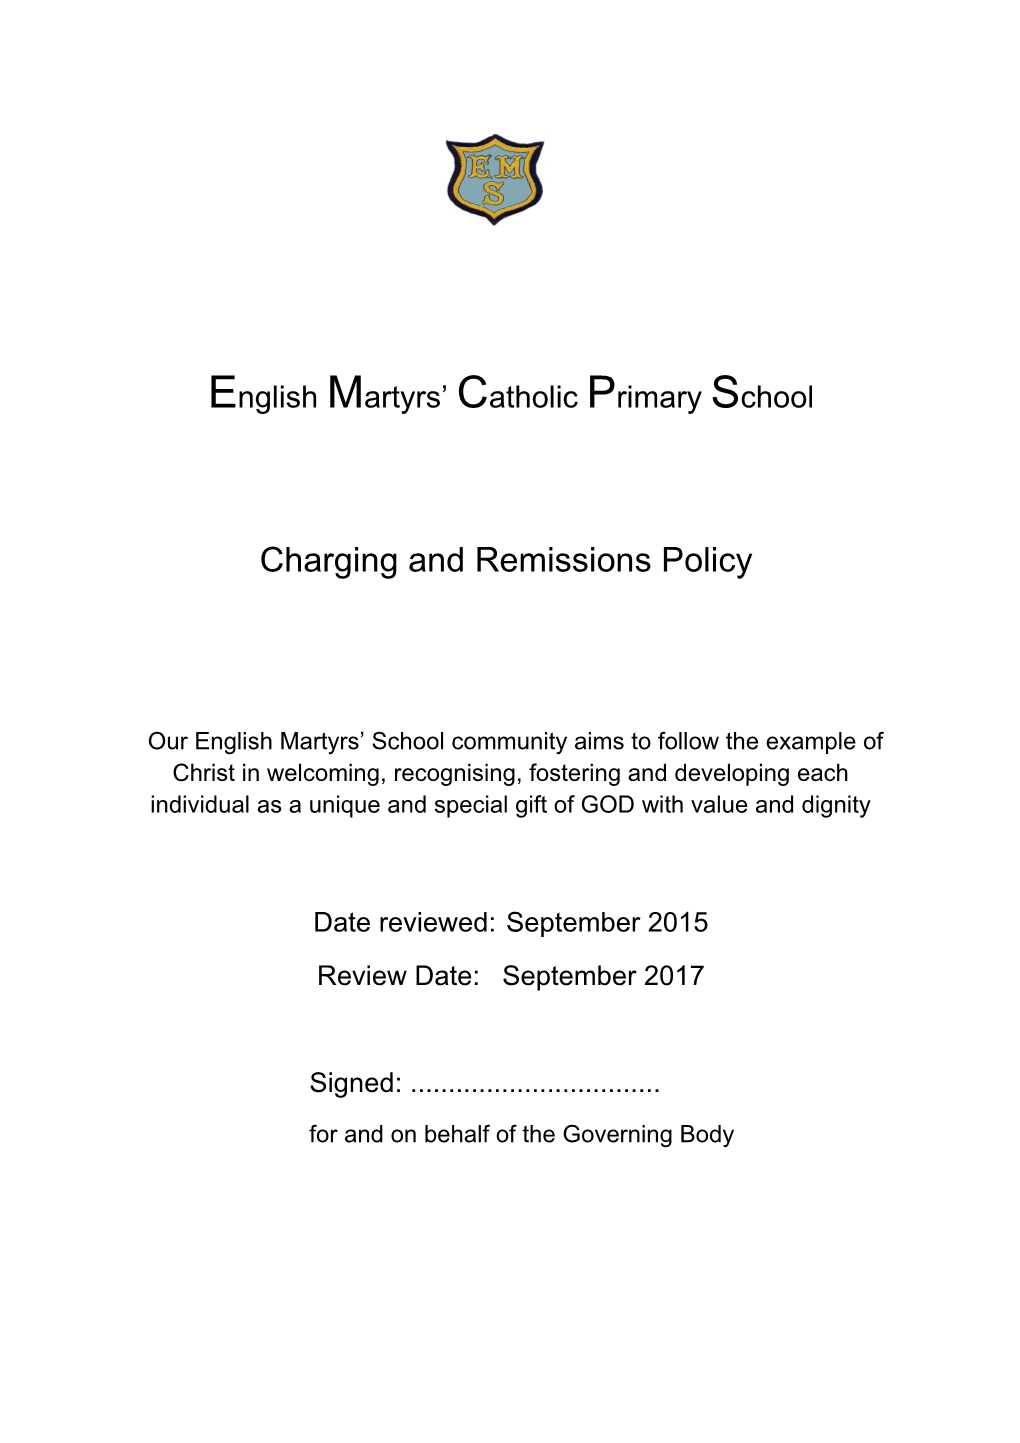 Charging and Remissions Policy for Pooles Park Primary School